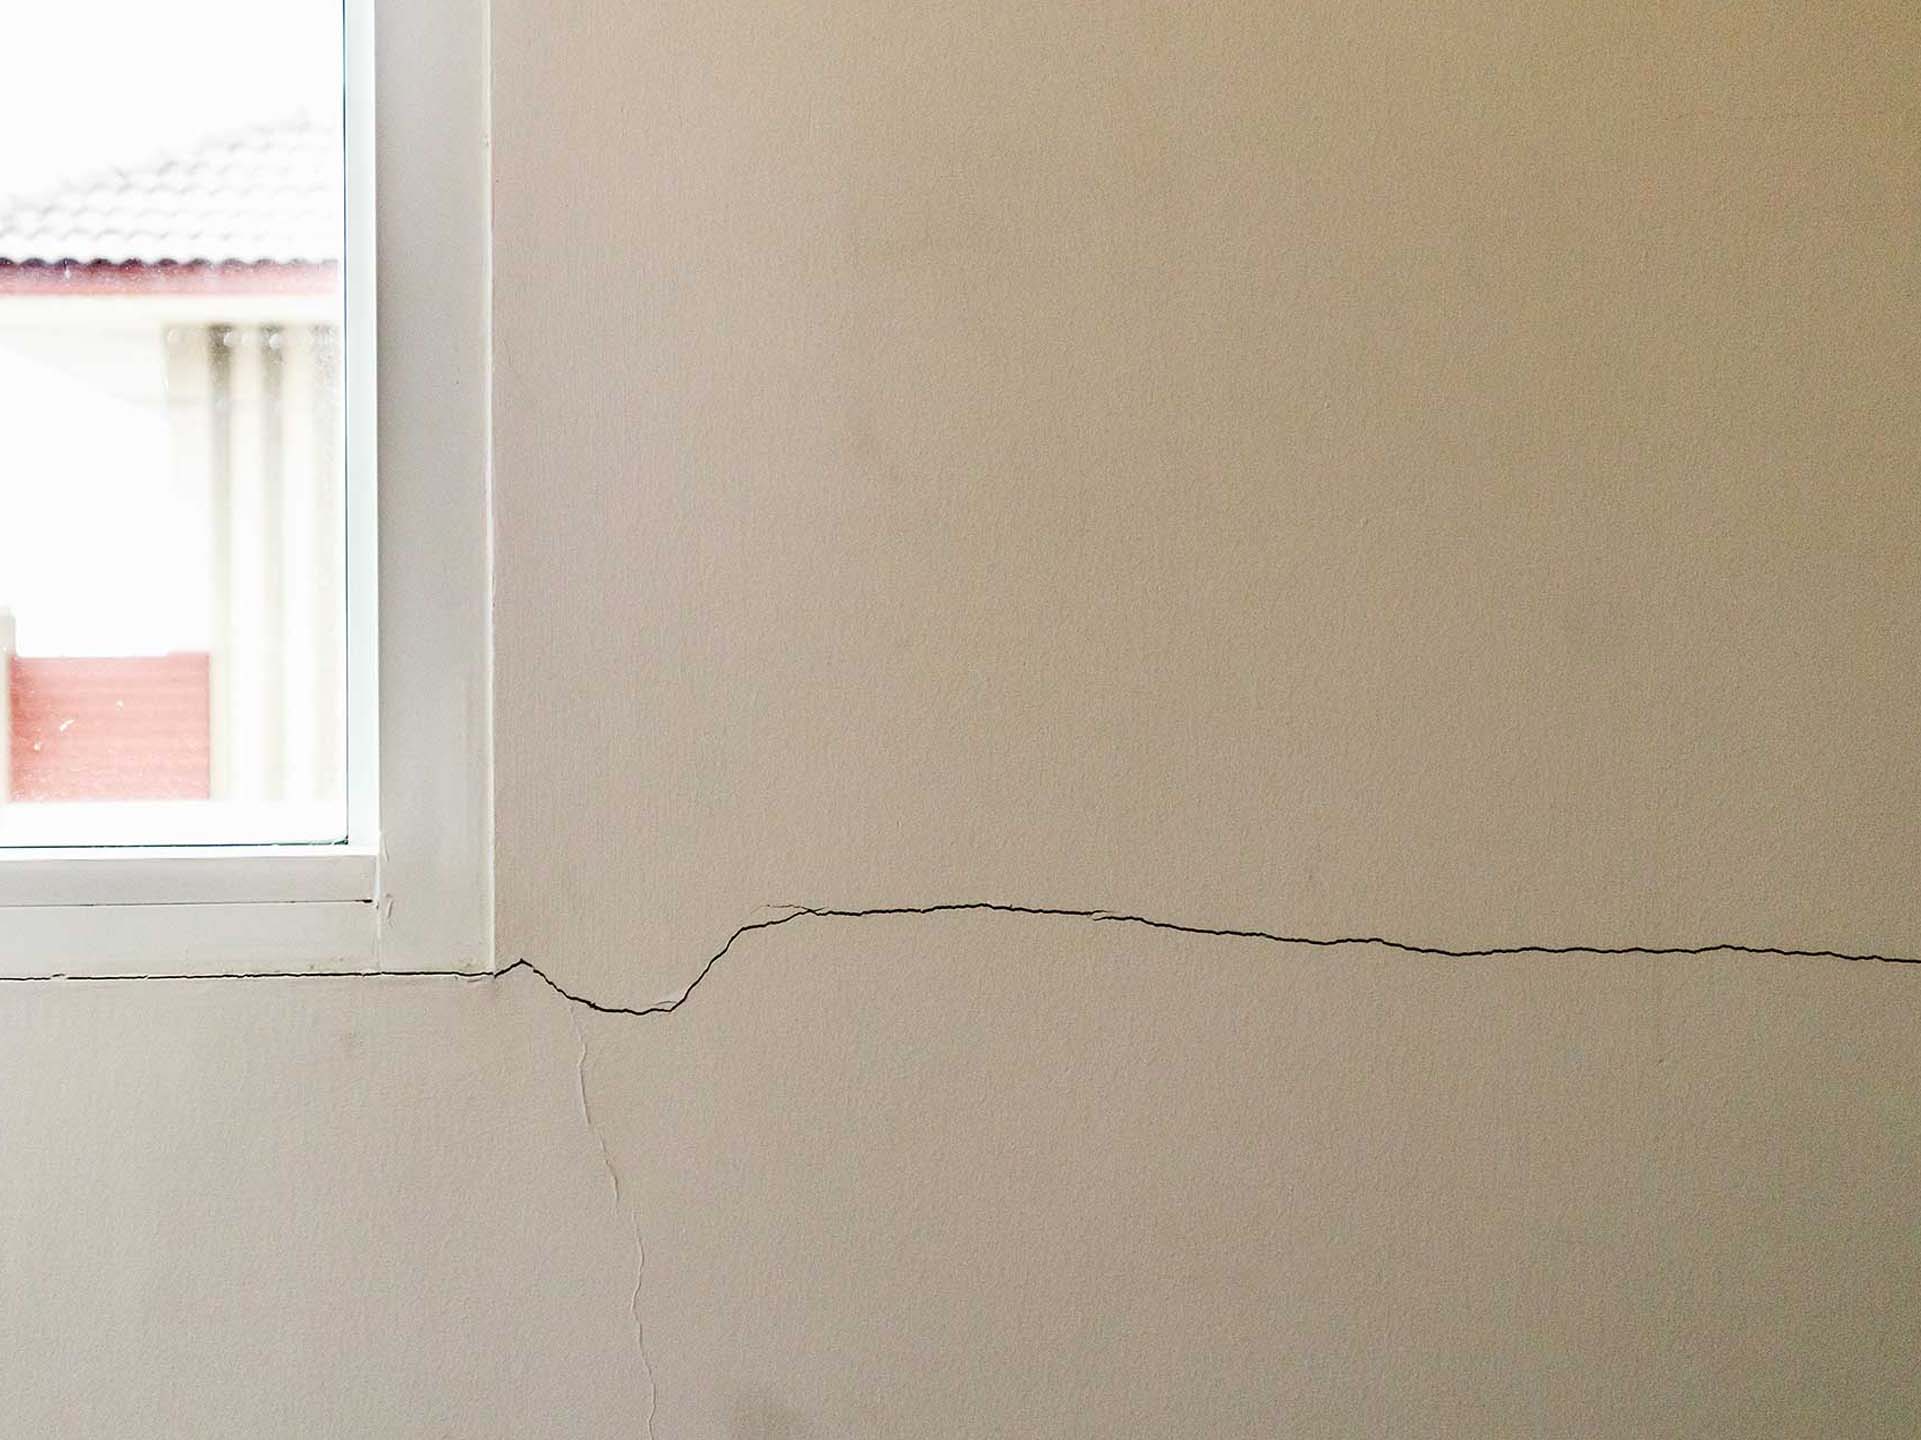 window cracks in drywall may be a sign that foundation repair is needed